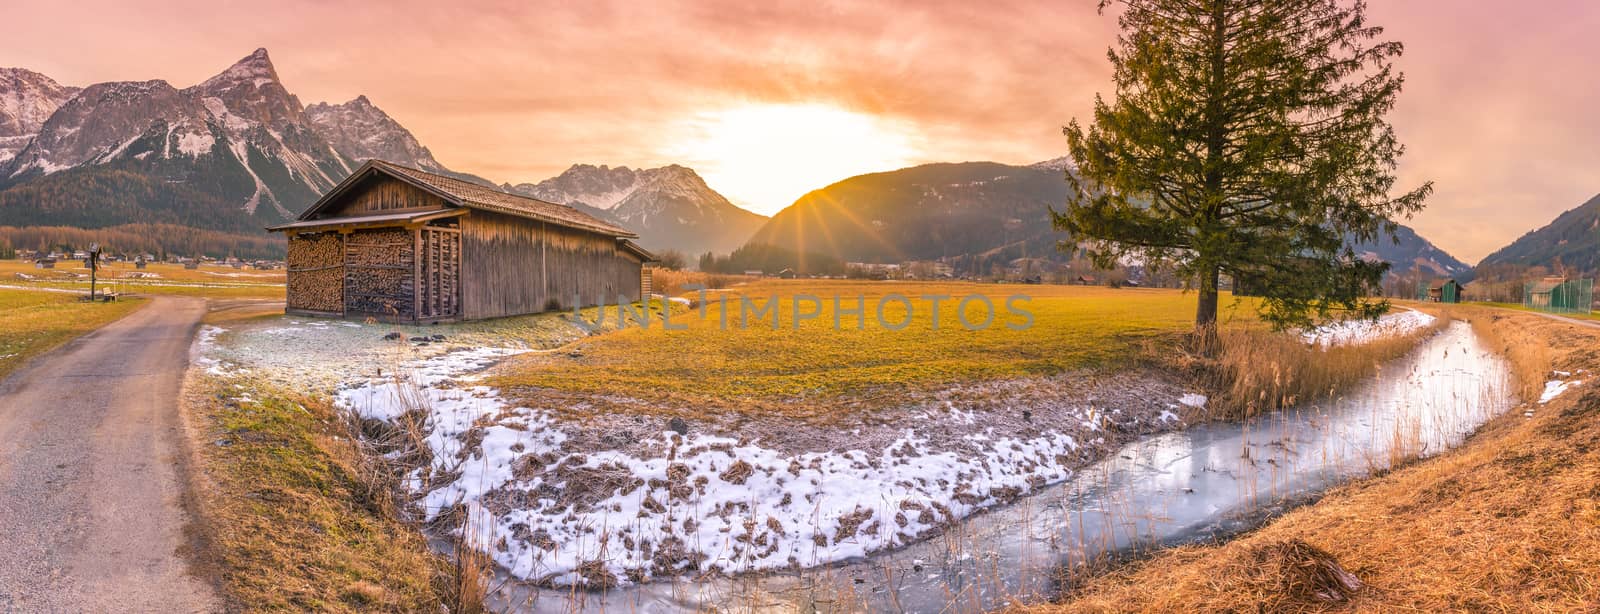 Winter sunset in the Austrian Alps by YesPhotographers